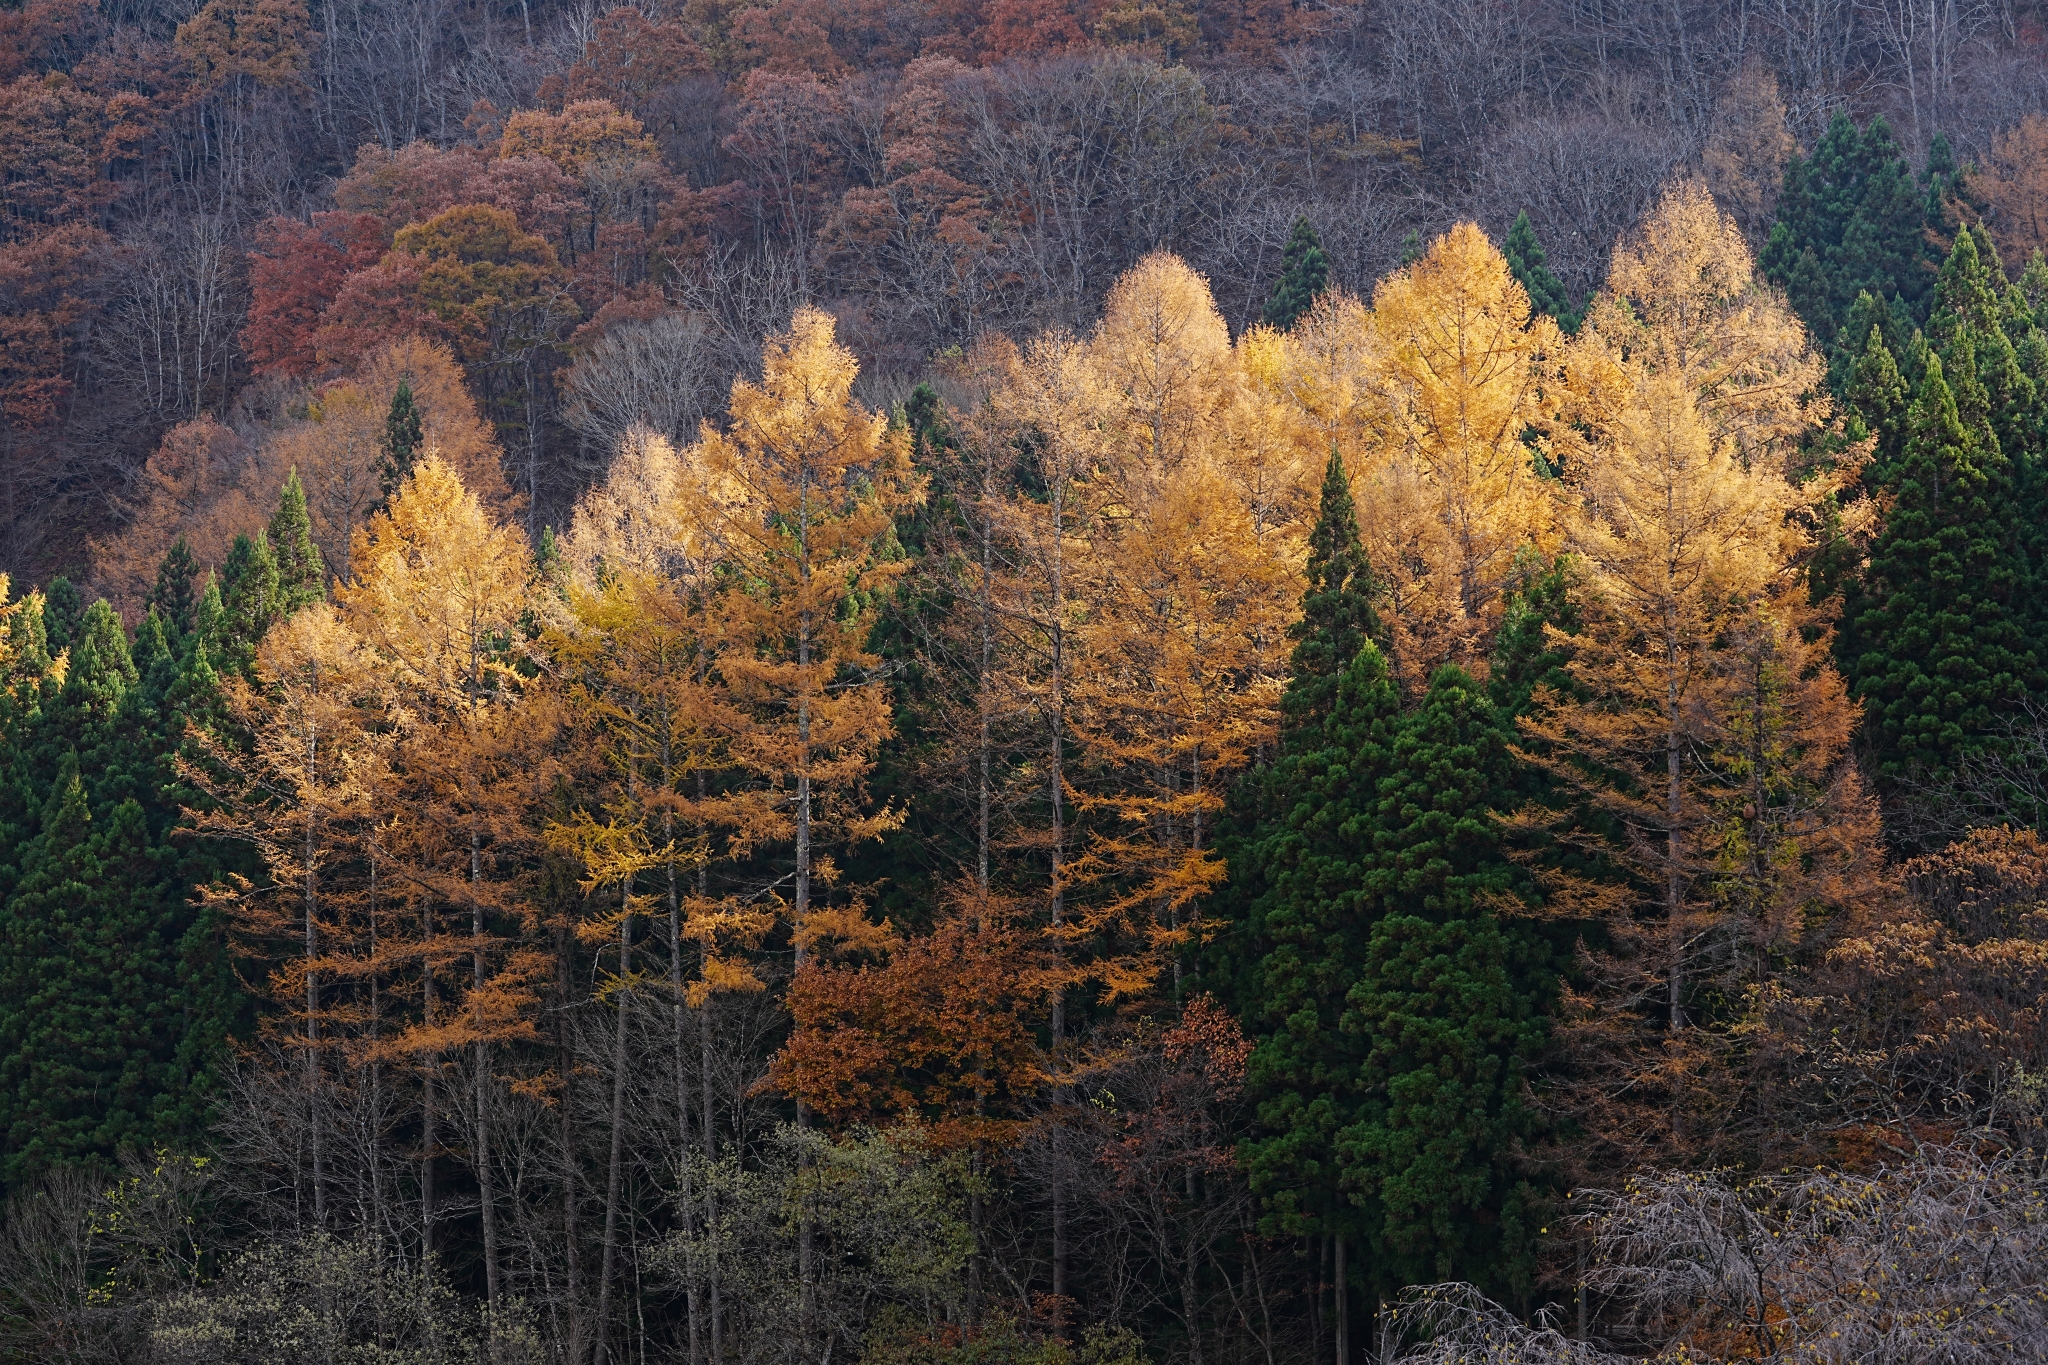 Forest with autumn leaves among evergreen trees